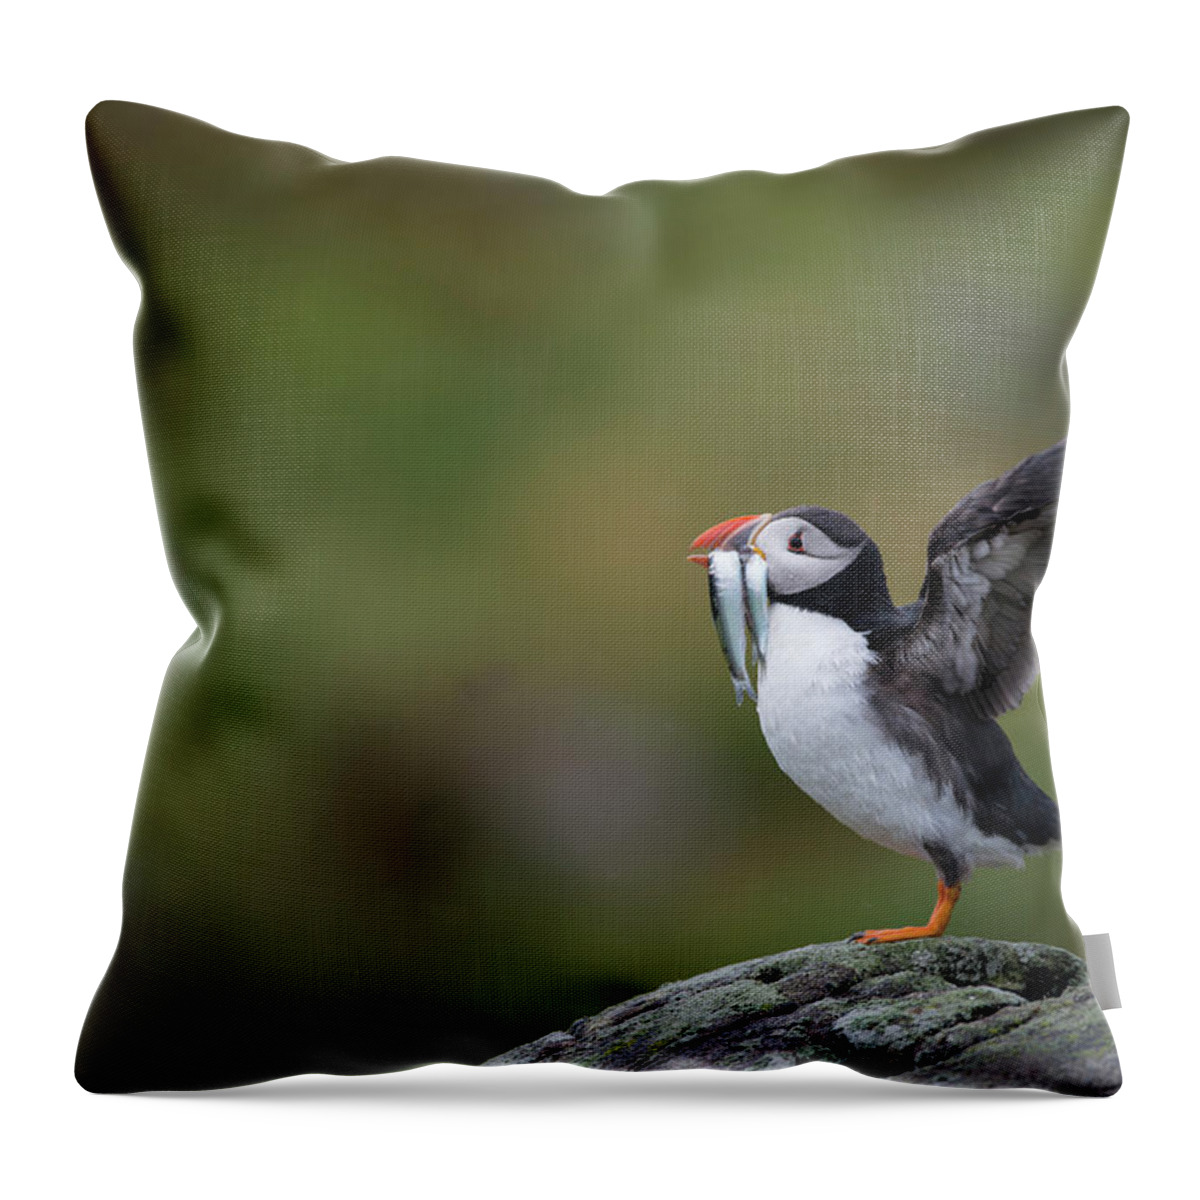 Care Throw Pillow featuring the photograph Puffin Carrying Sandeels, Isle Of May Uk by Mike Powles